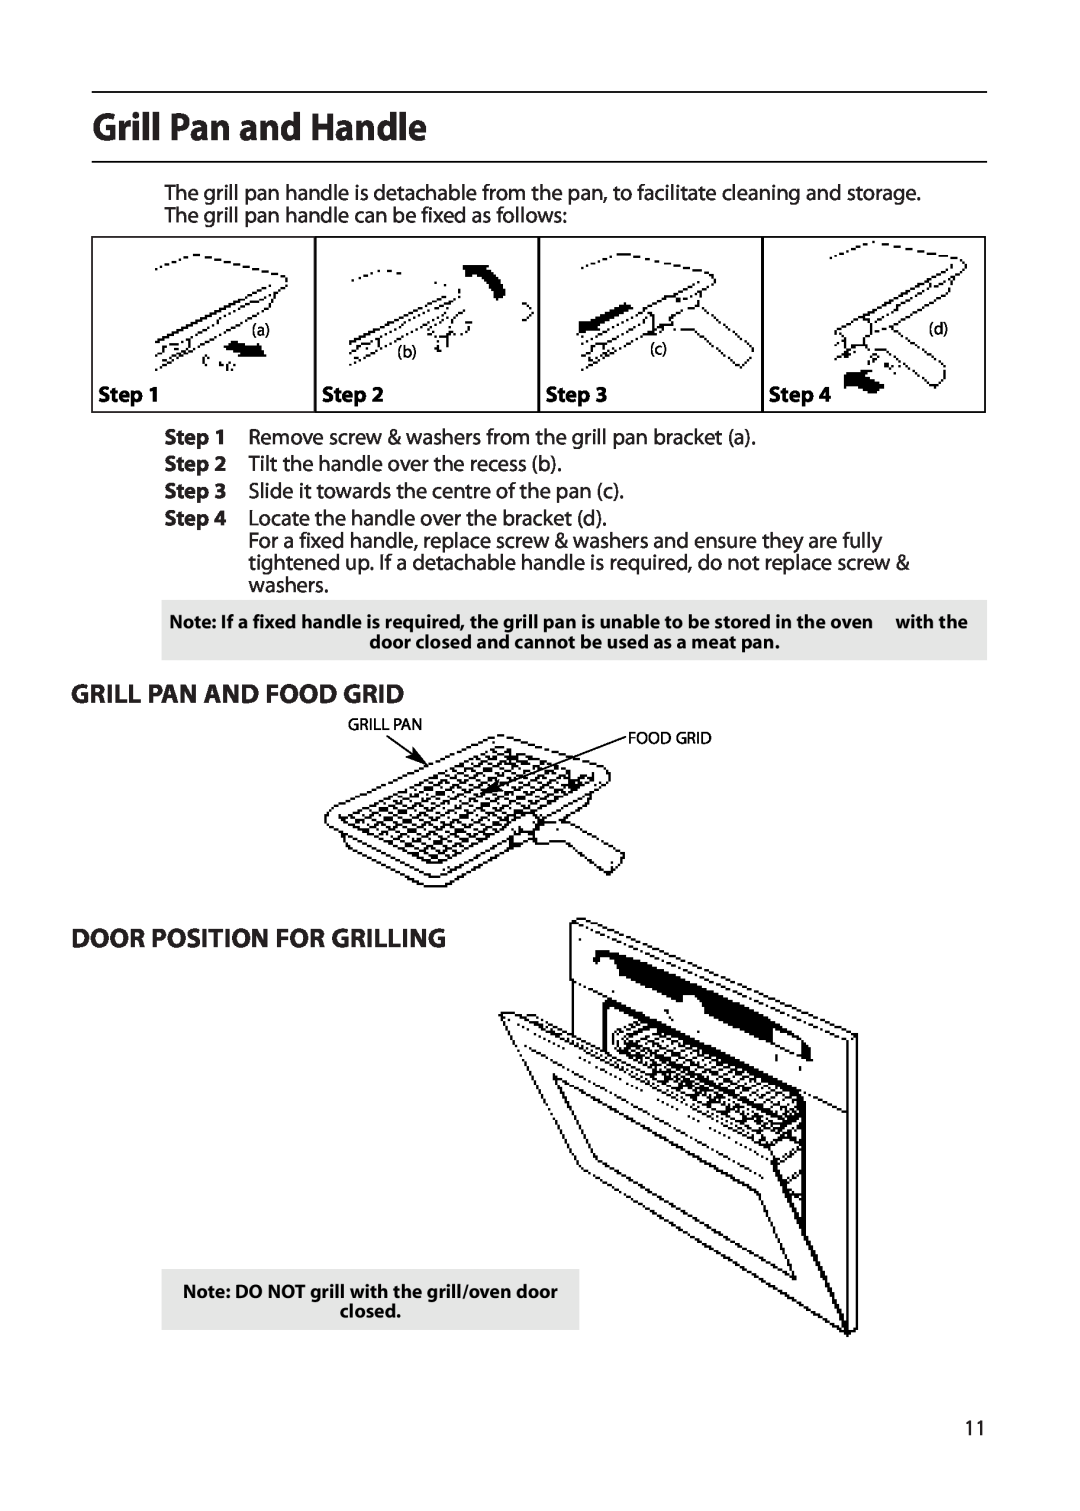 Creda D010E manual Grill Pan and Handle, Grill Pan And Food Grid, Door Position For Grilling, Step 